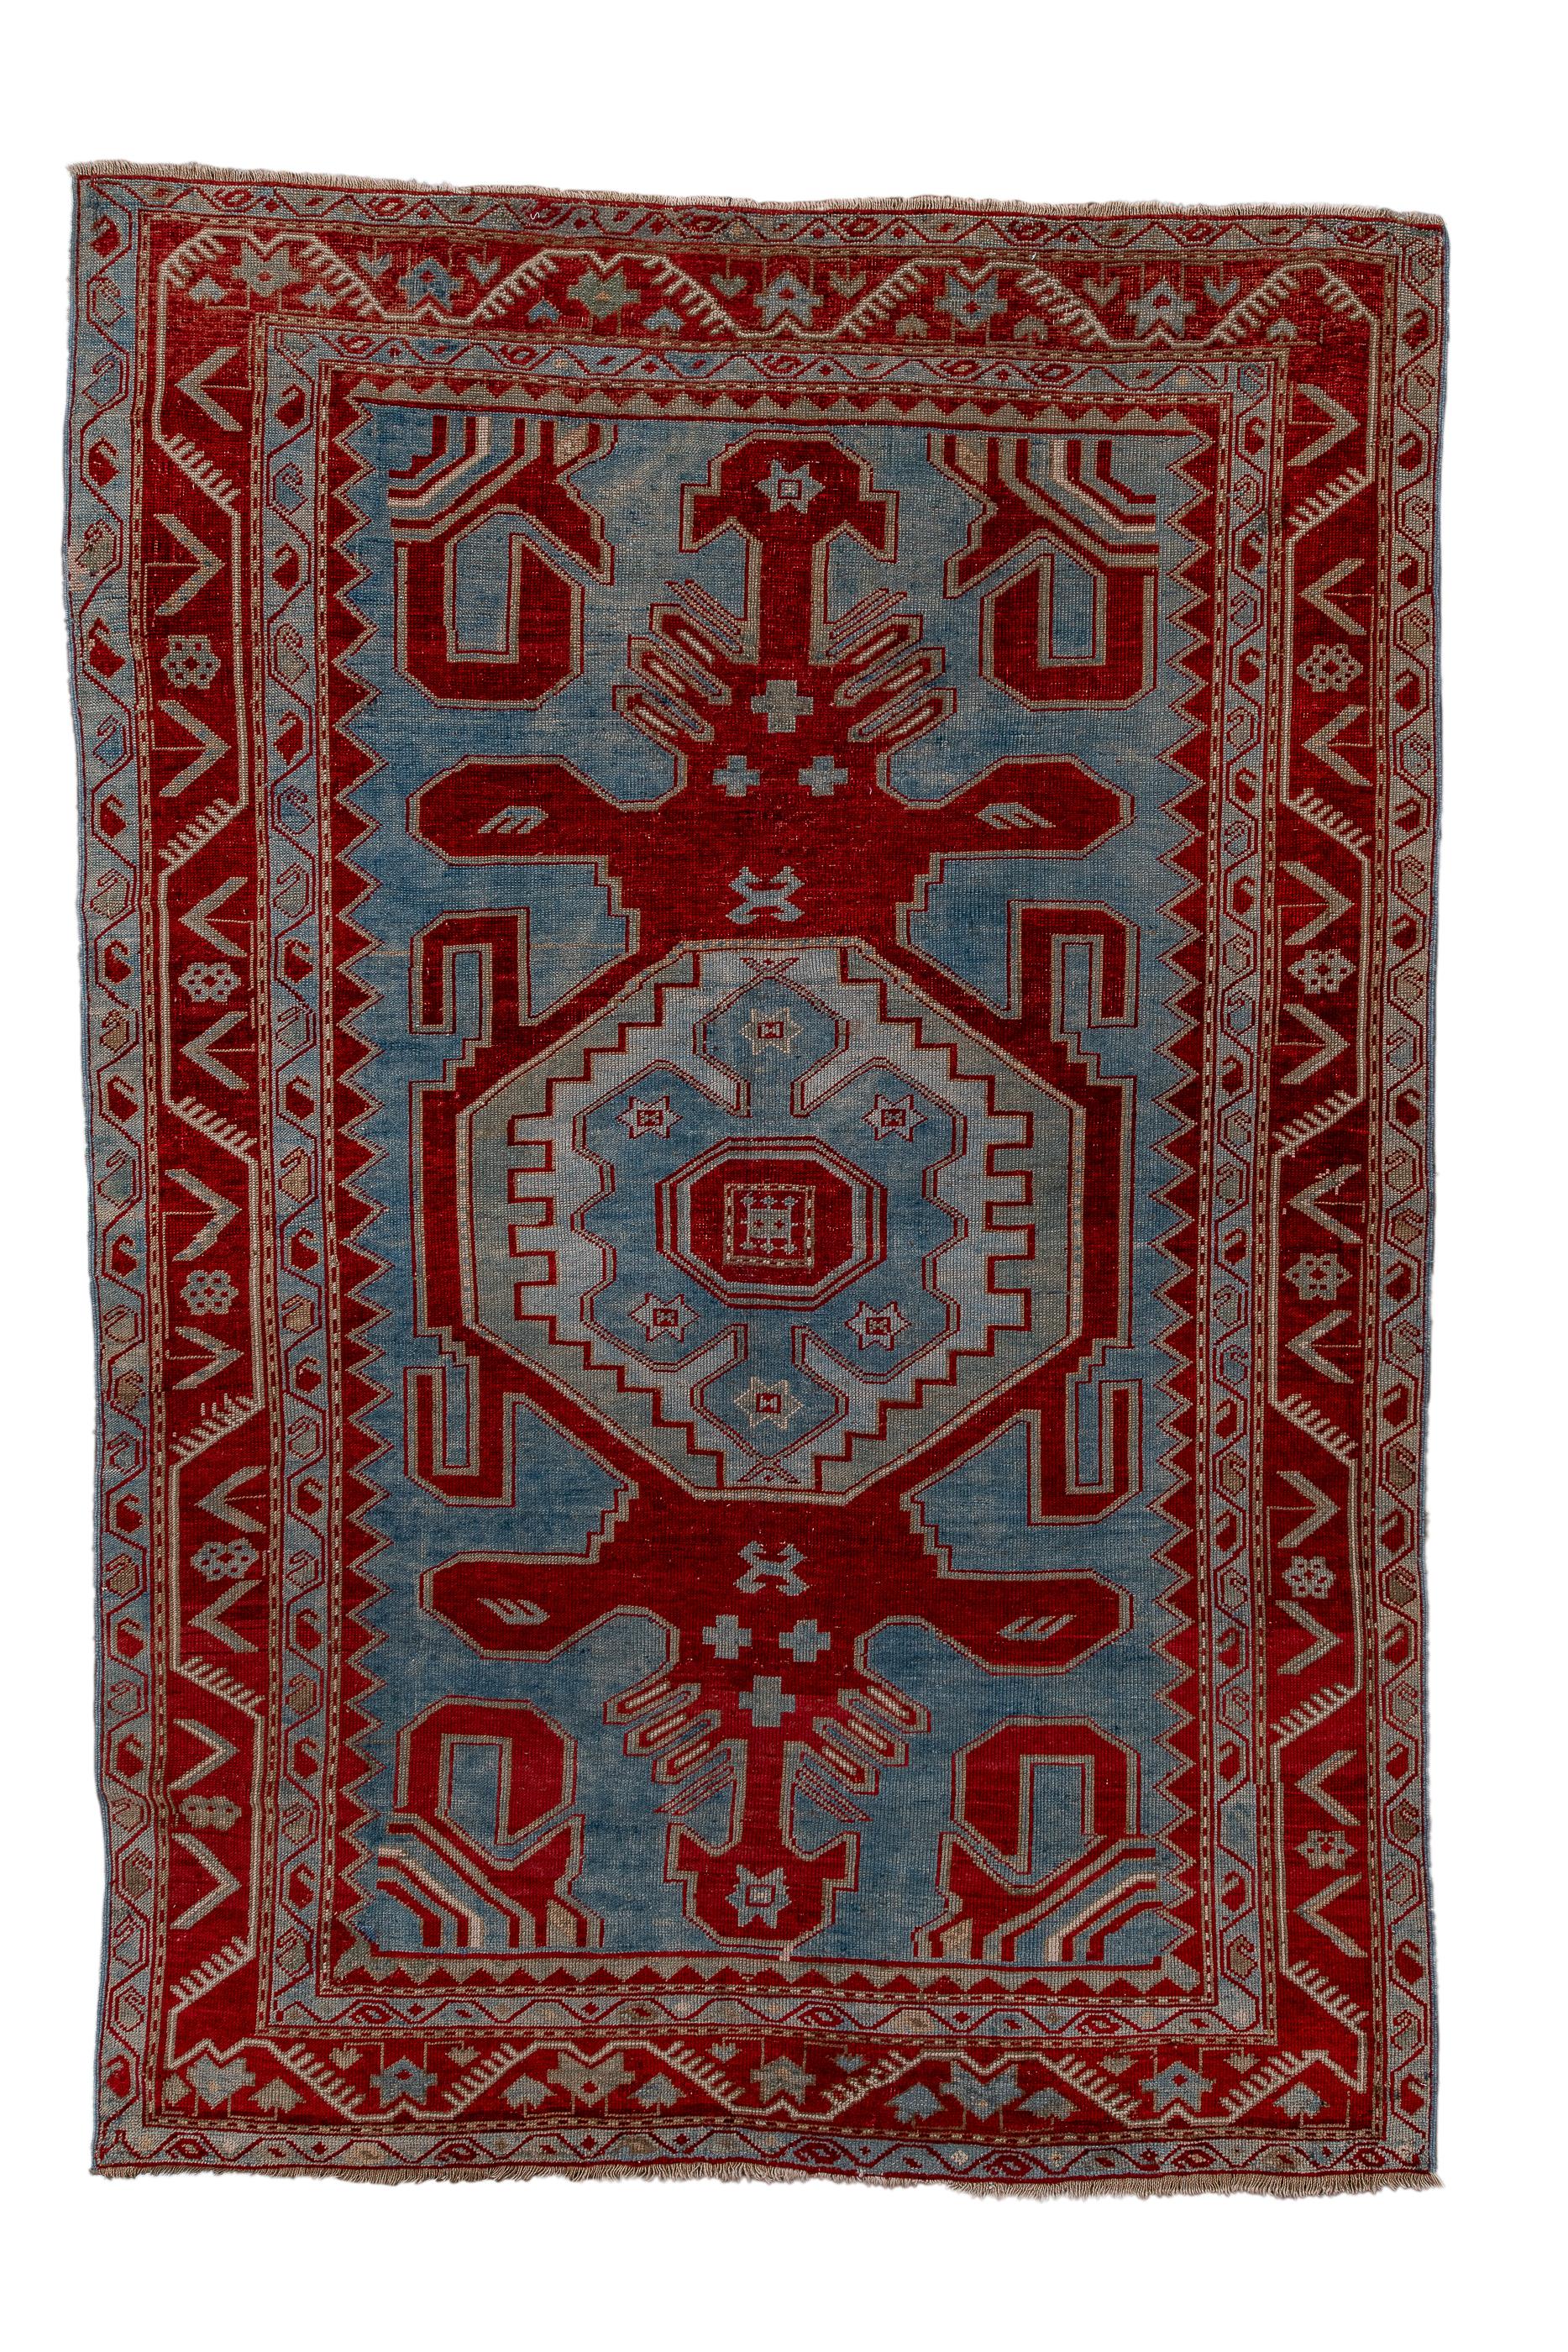 This bold study in dark red and light blue shows an octagonal central medallion enclosing a stepped ecru panel and centred by a light blue, lobed sub-medallion. Powerful red geometric volutes curve in from the corners. Main red border with rosettes